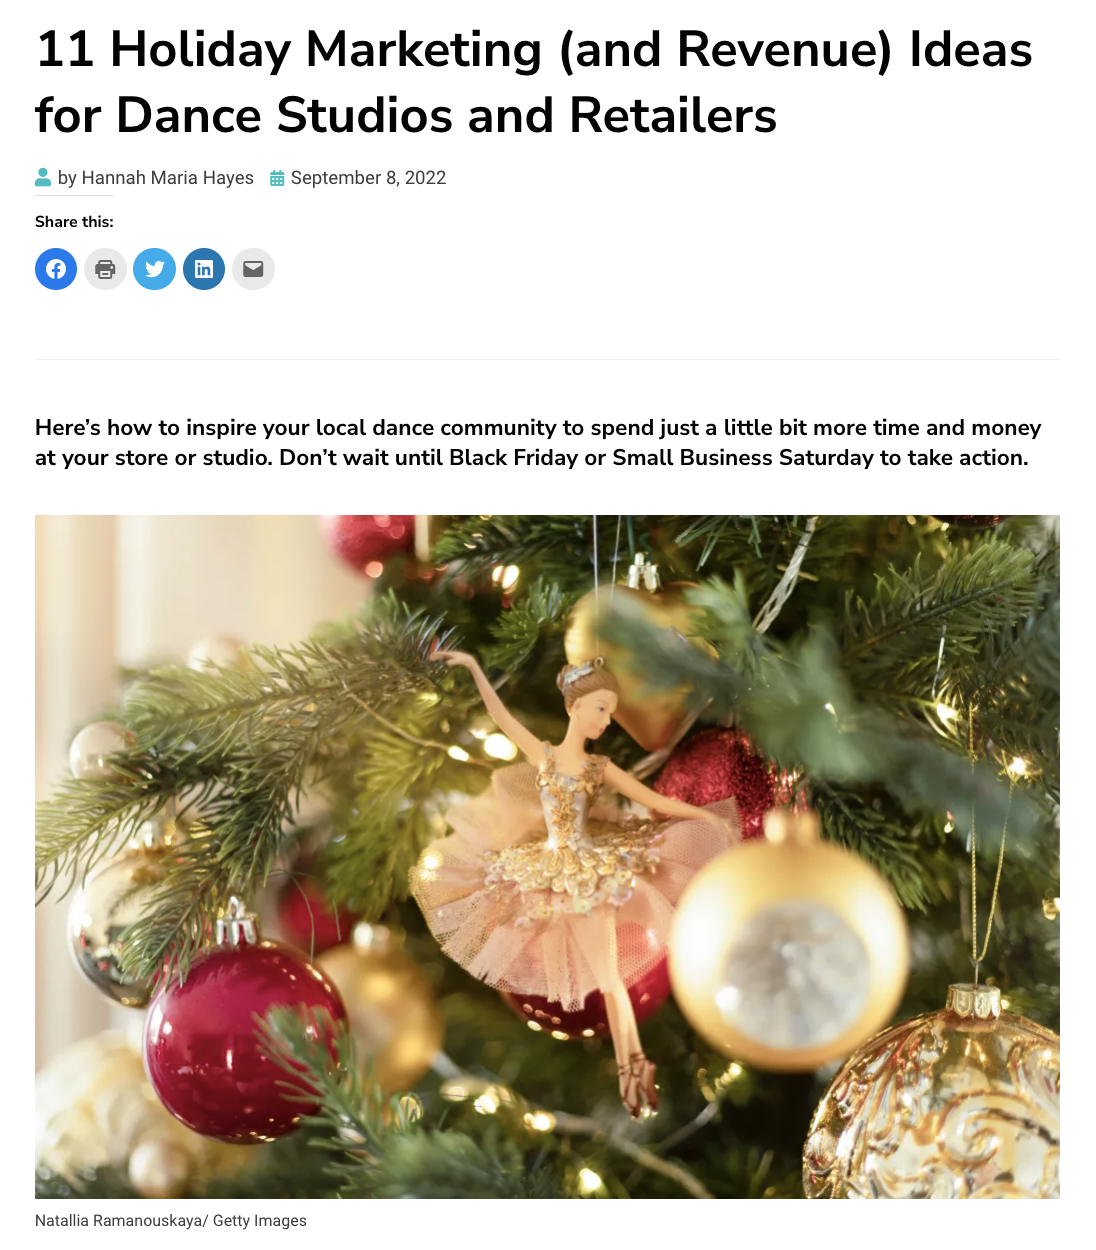 11 Holiday Marketing (and Revenue) Ideas for Dance Studios and Retailers